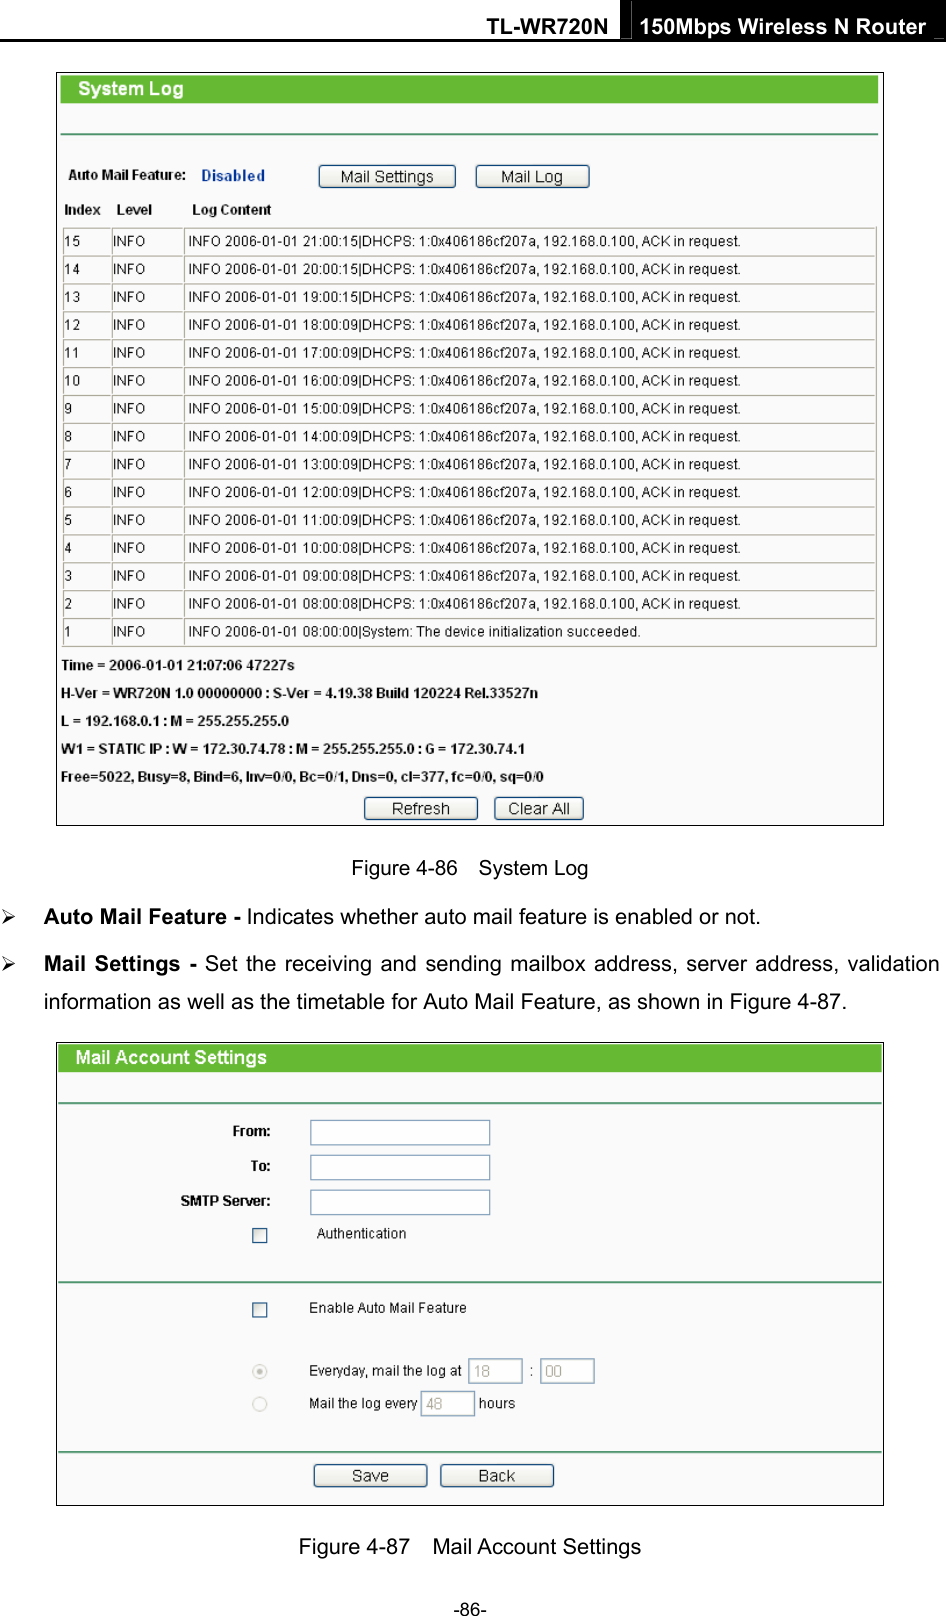 TL-WR720N 150Mbps Wireless N Router  Figure 4-86  System Log ¾ Auto Mail Feature - Indicates whether auto mail feature is enabled or not.   ¾ Mail Settings - Set the receiving and sending mailbox address, server address, validation information as well as the timetable for Auto Mail Feature, as shown in Figure 4-87.  Figure 4-87  Mail Account Settings -86- 